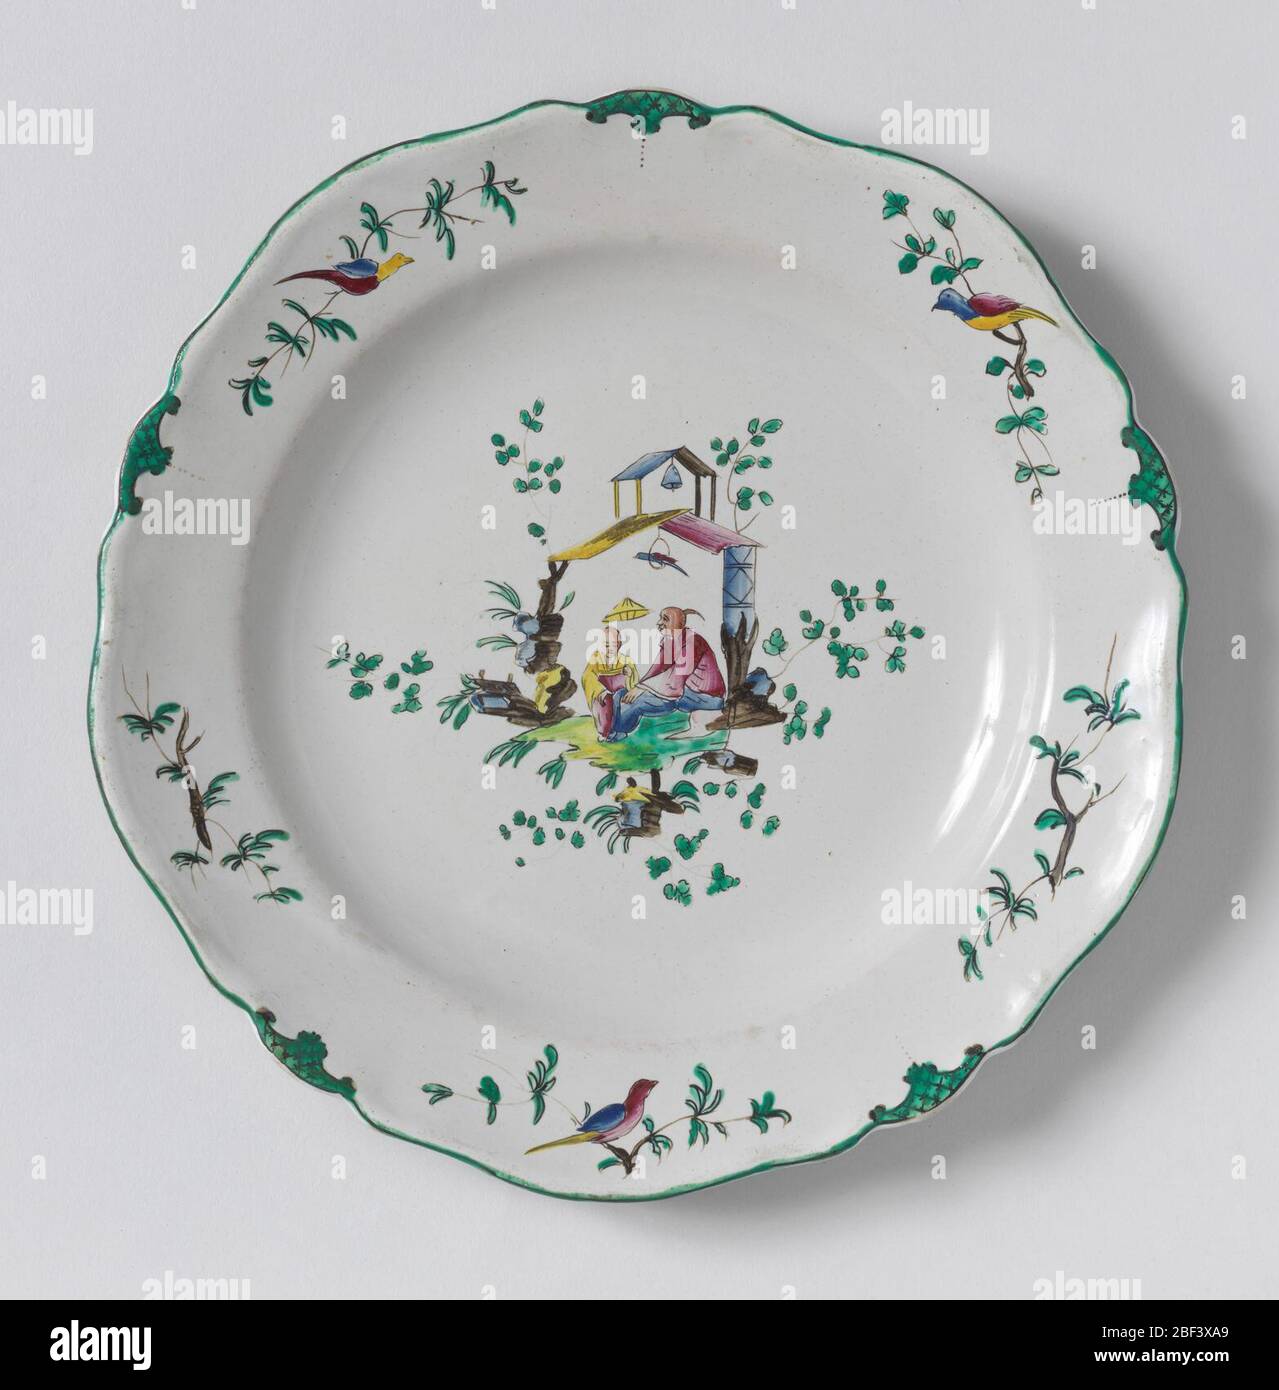 Plate. Circular cavetto, scalloped rim irregularly ten-sided. Chinoiserie decoration: seated man and boy holding parasol under double-roofed shelter supporting a bell and a bird, the whole surrounded by foliage. Border of alternating birds and green latticed panels. Stock Photo